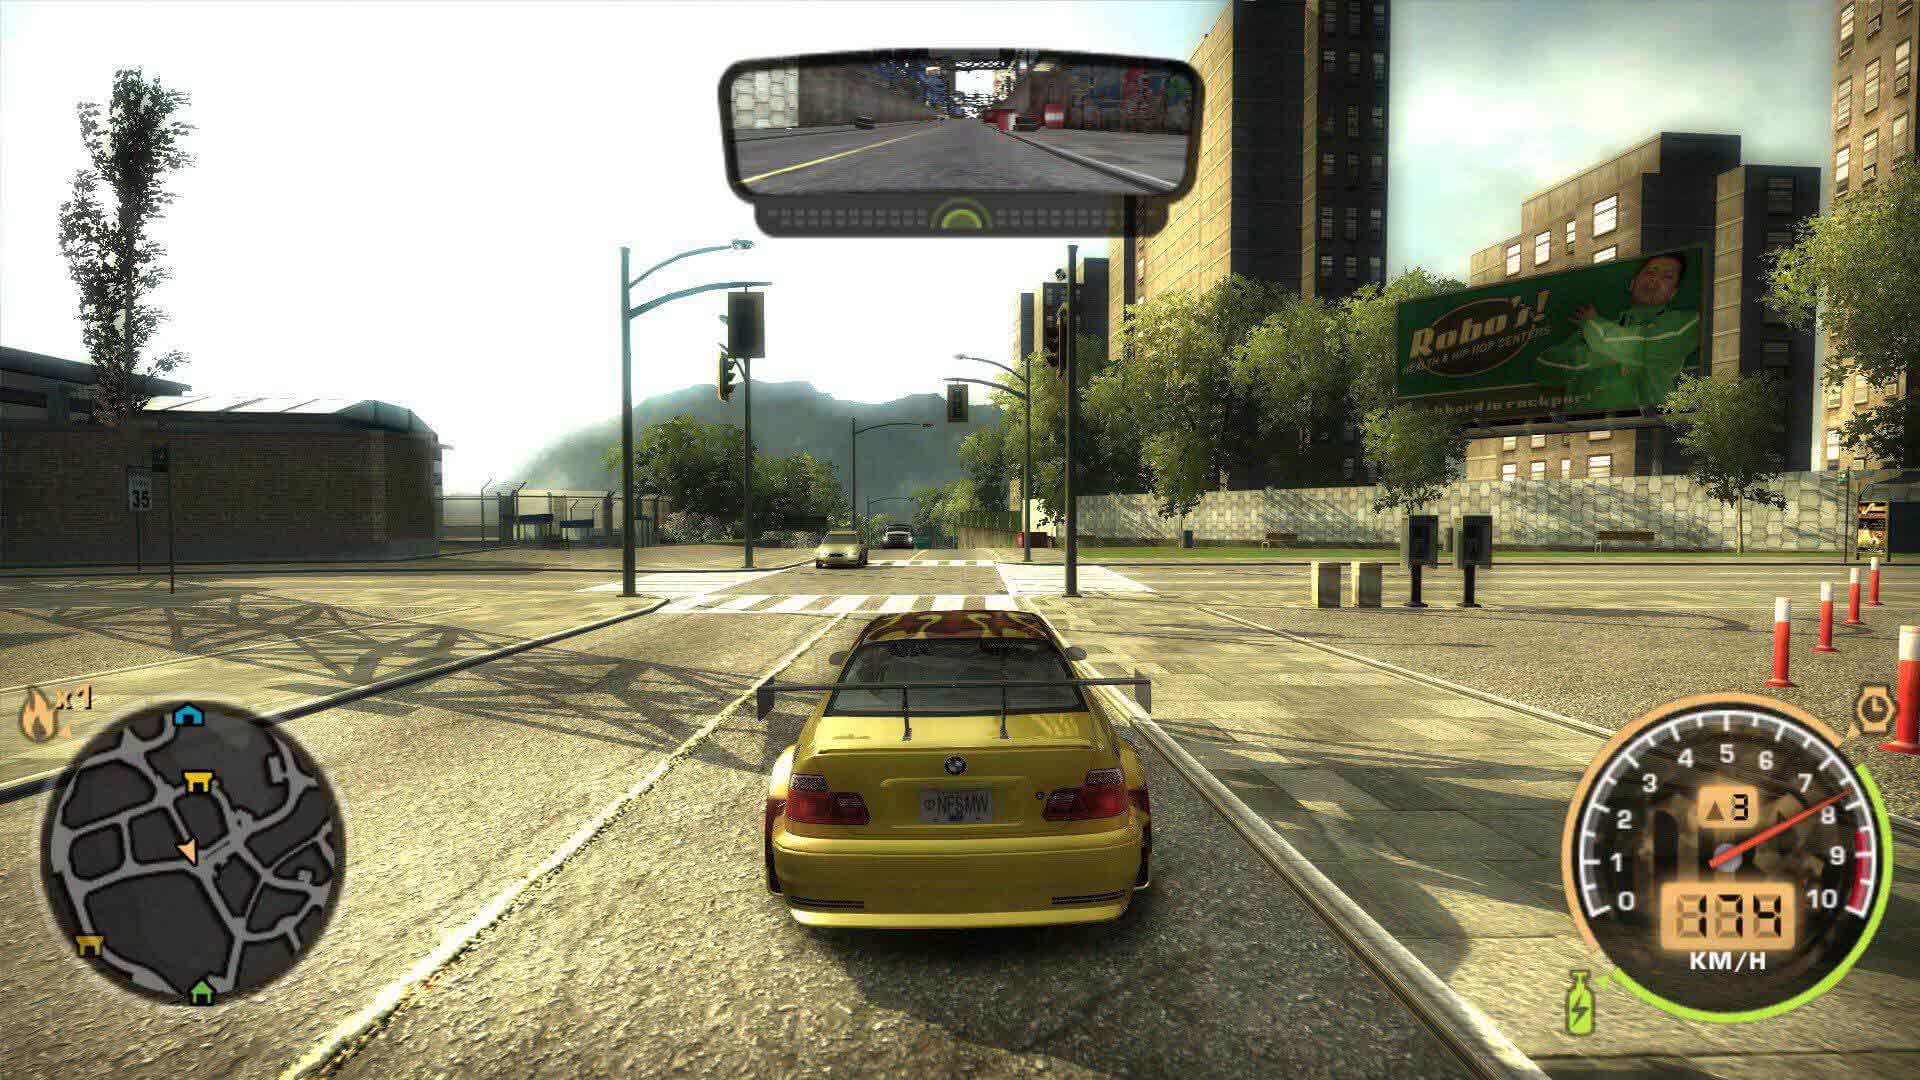 Игры гонки недфорспид. Need for Speed most wanted 2005. Гонки NFS most wanted Black Edition. NFS most wanted 2005 геймплей. Гонки NFS most wanted 2005.